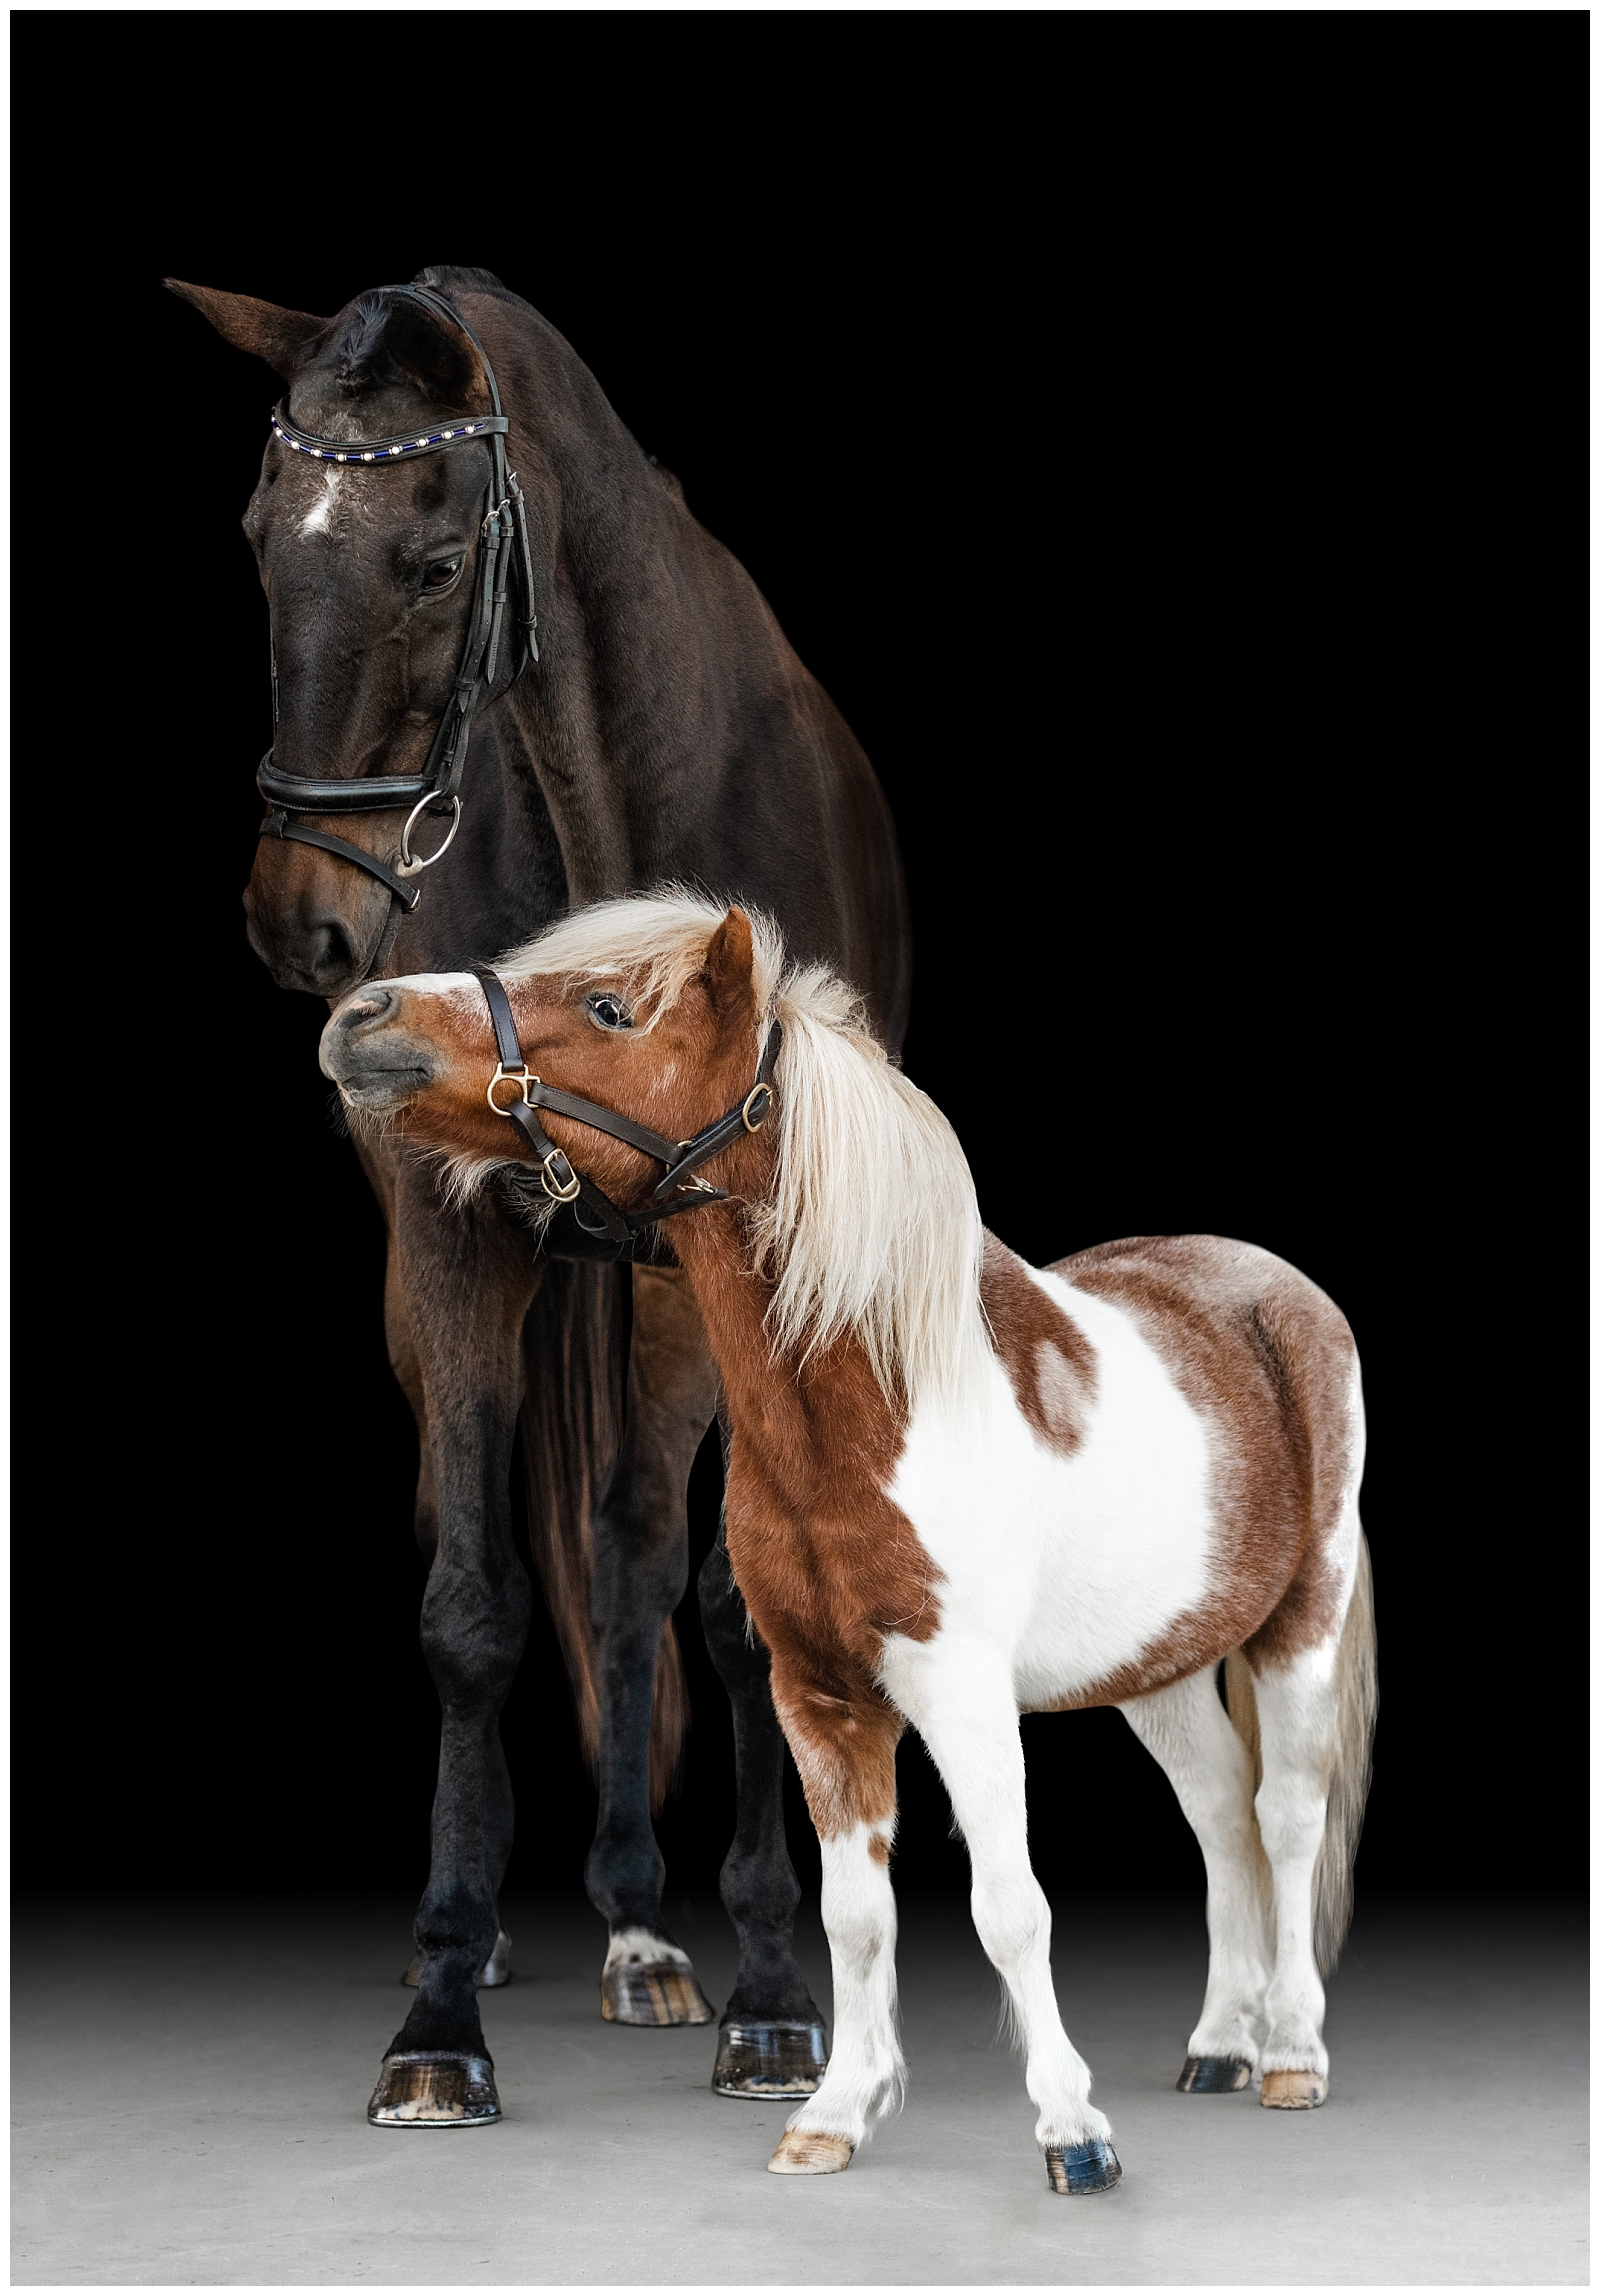 A Thoroughbred and a Miniature horse are bestfriends. Photographed together on a black background in Northwest Florida. Painted Oak Photography.